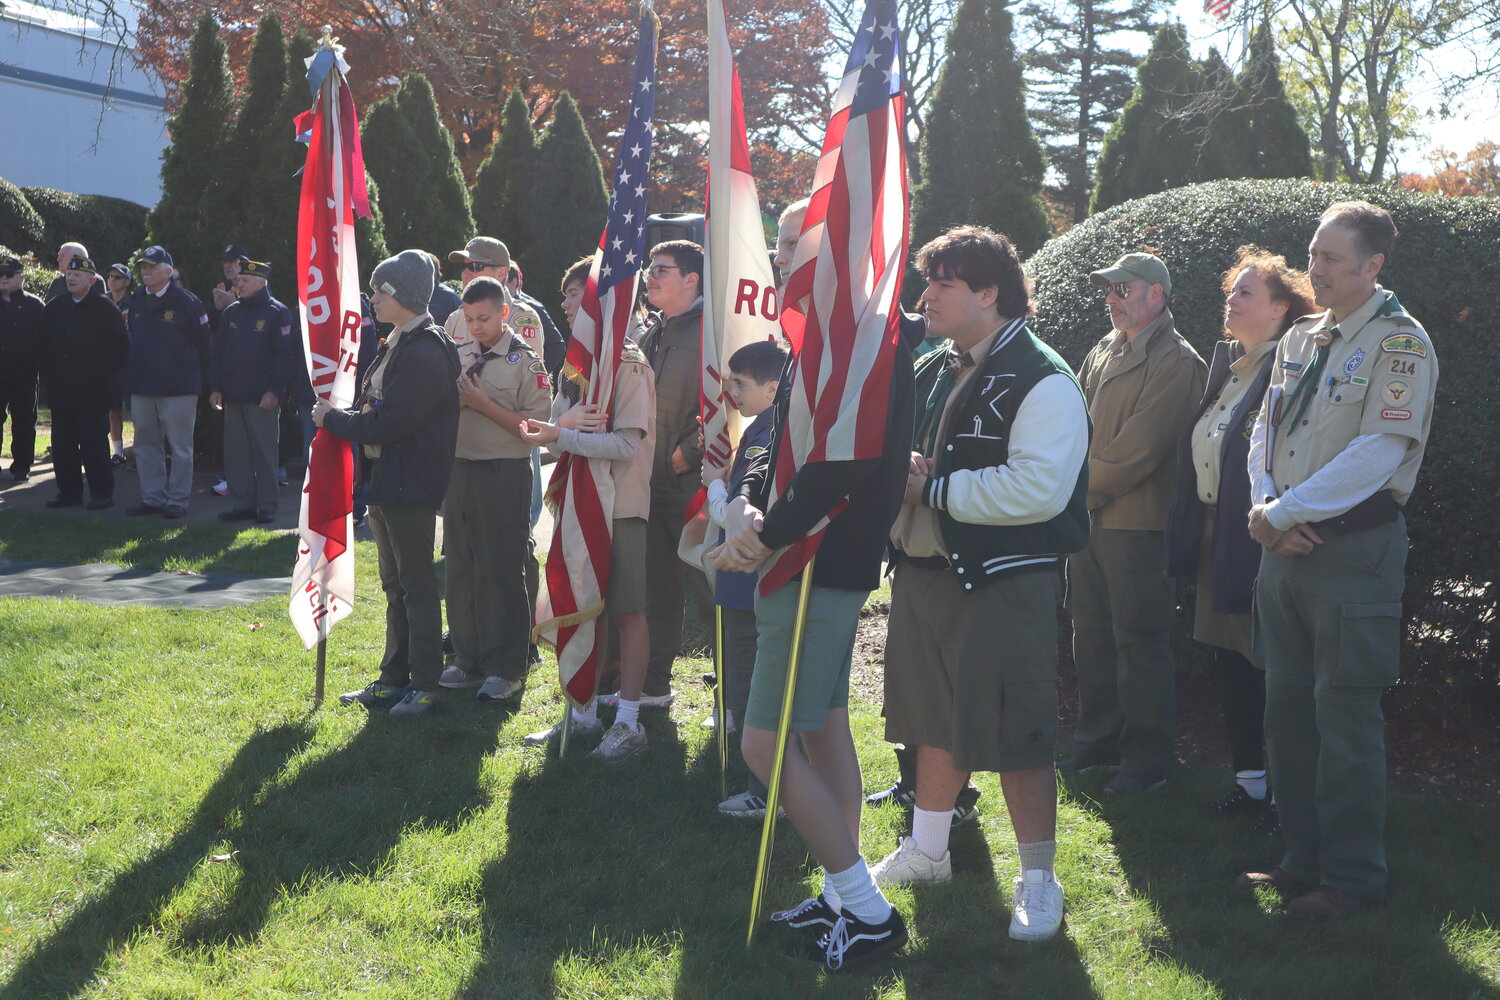 Members of Boy Scout Troops 40 and 214 honoring local veterans in the ceremony at the Recreation Center last Saturday.